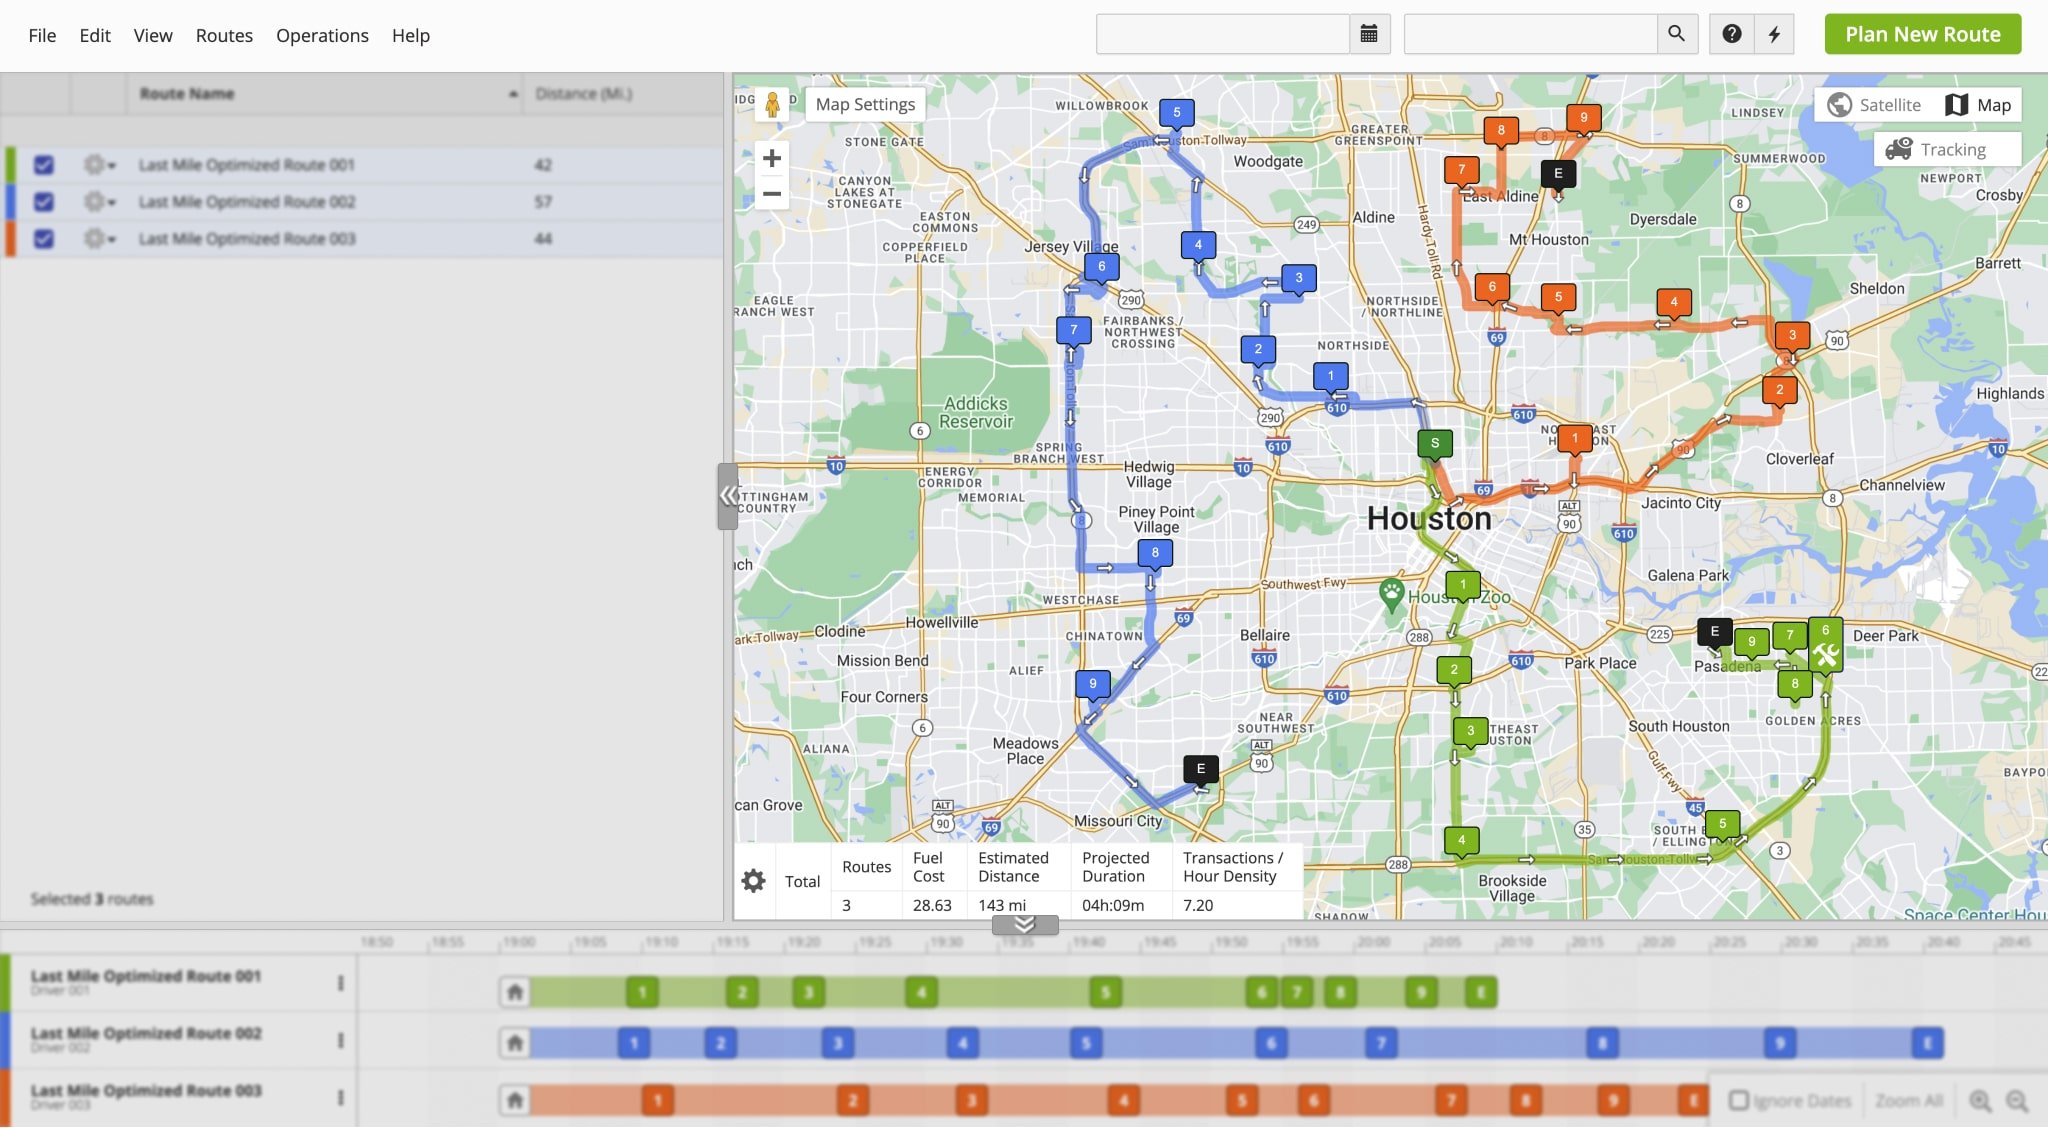 The Interactive Map displays routes enabled from the Routes Map List with their respective destination sequences. You can customize map settings, enable user and driver tracking, and have access to destination management options.